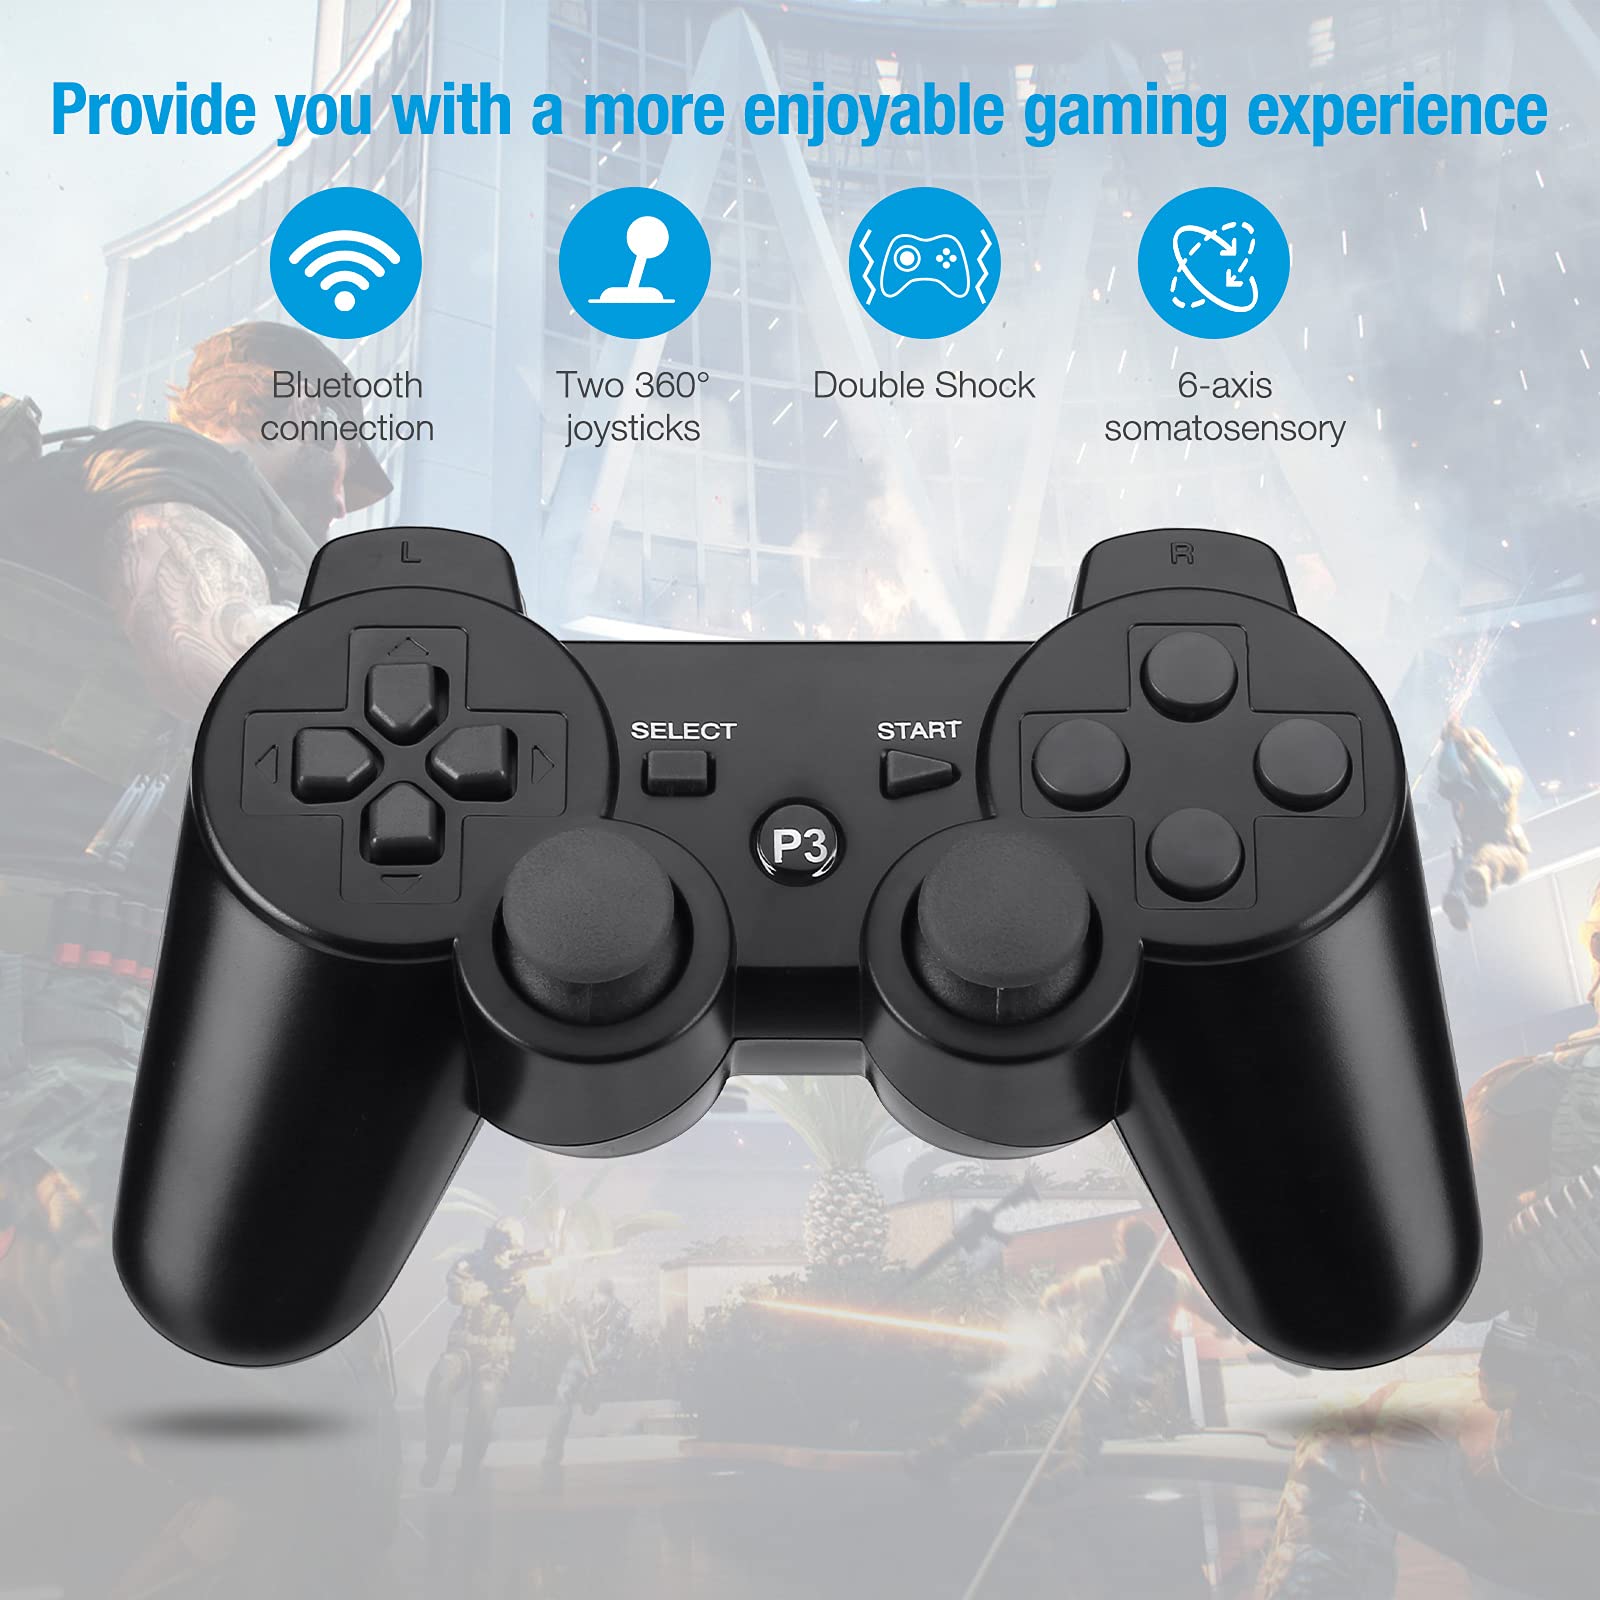 Powerextra Wireless Controller Compatible with PS-3, 2 Pack High Performance Gaming Controller with Upgraded Joystick for Play-Station 3 (Black)